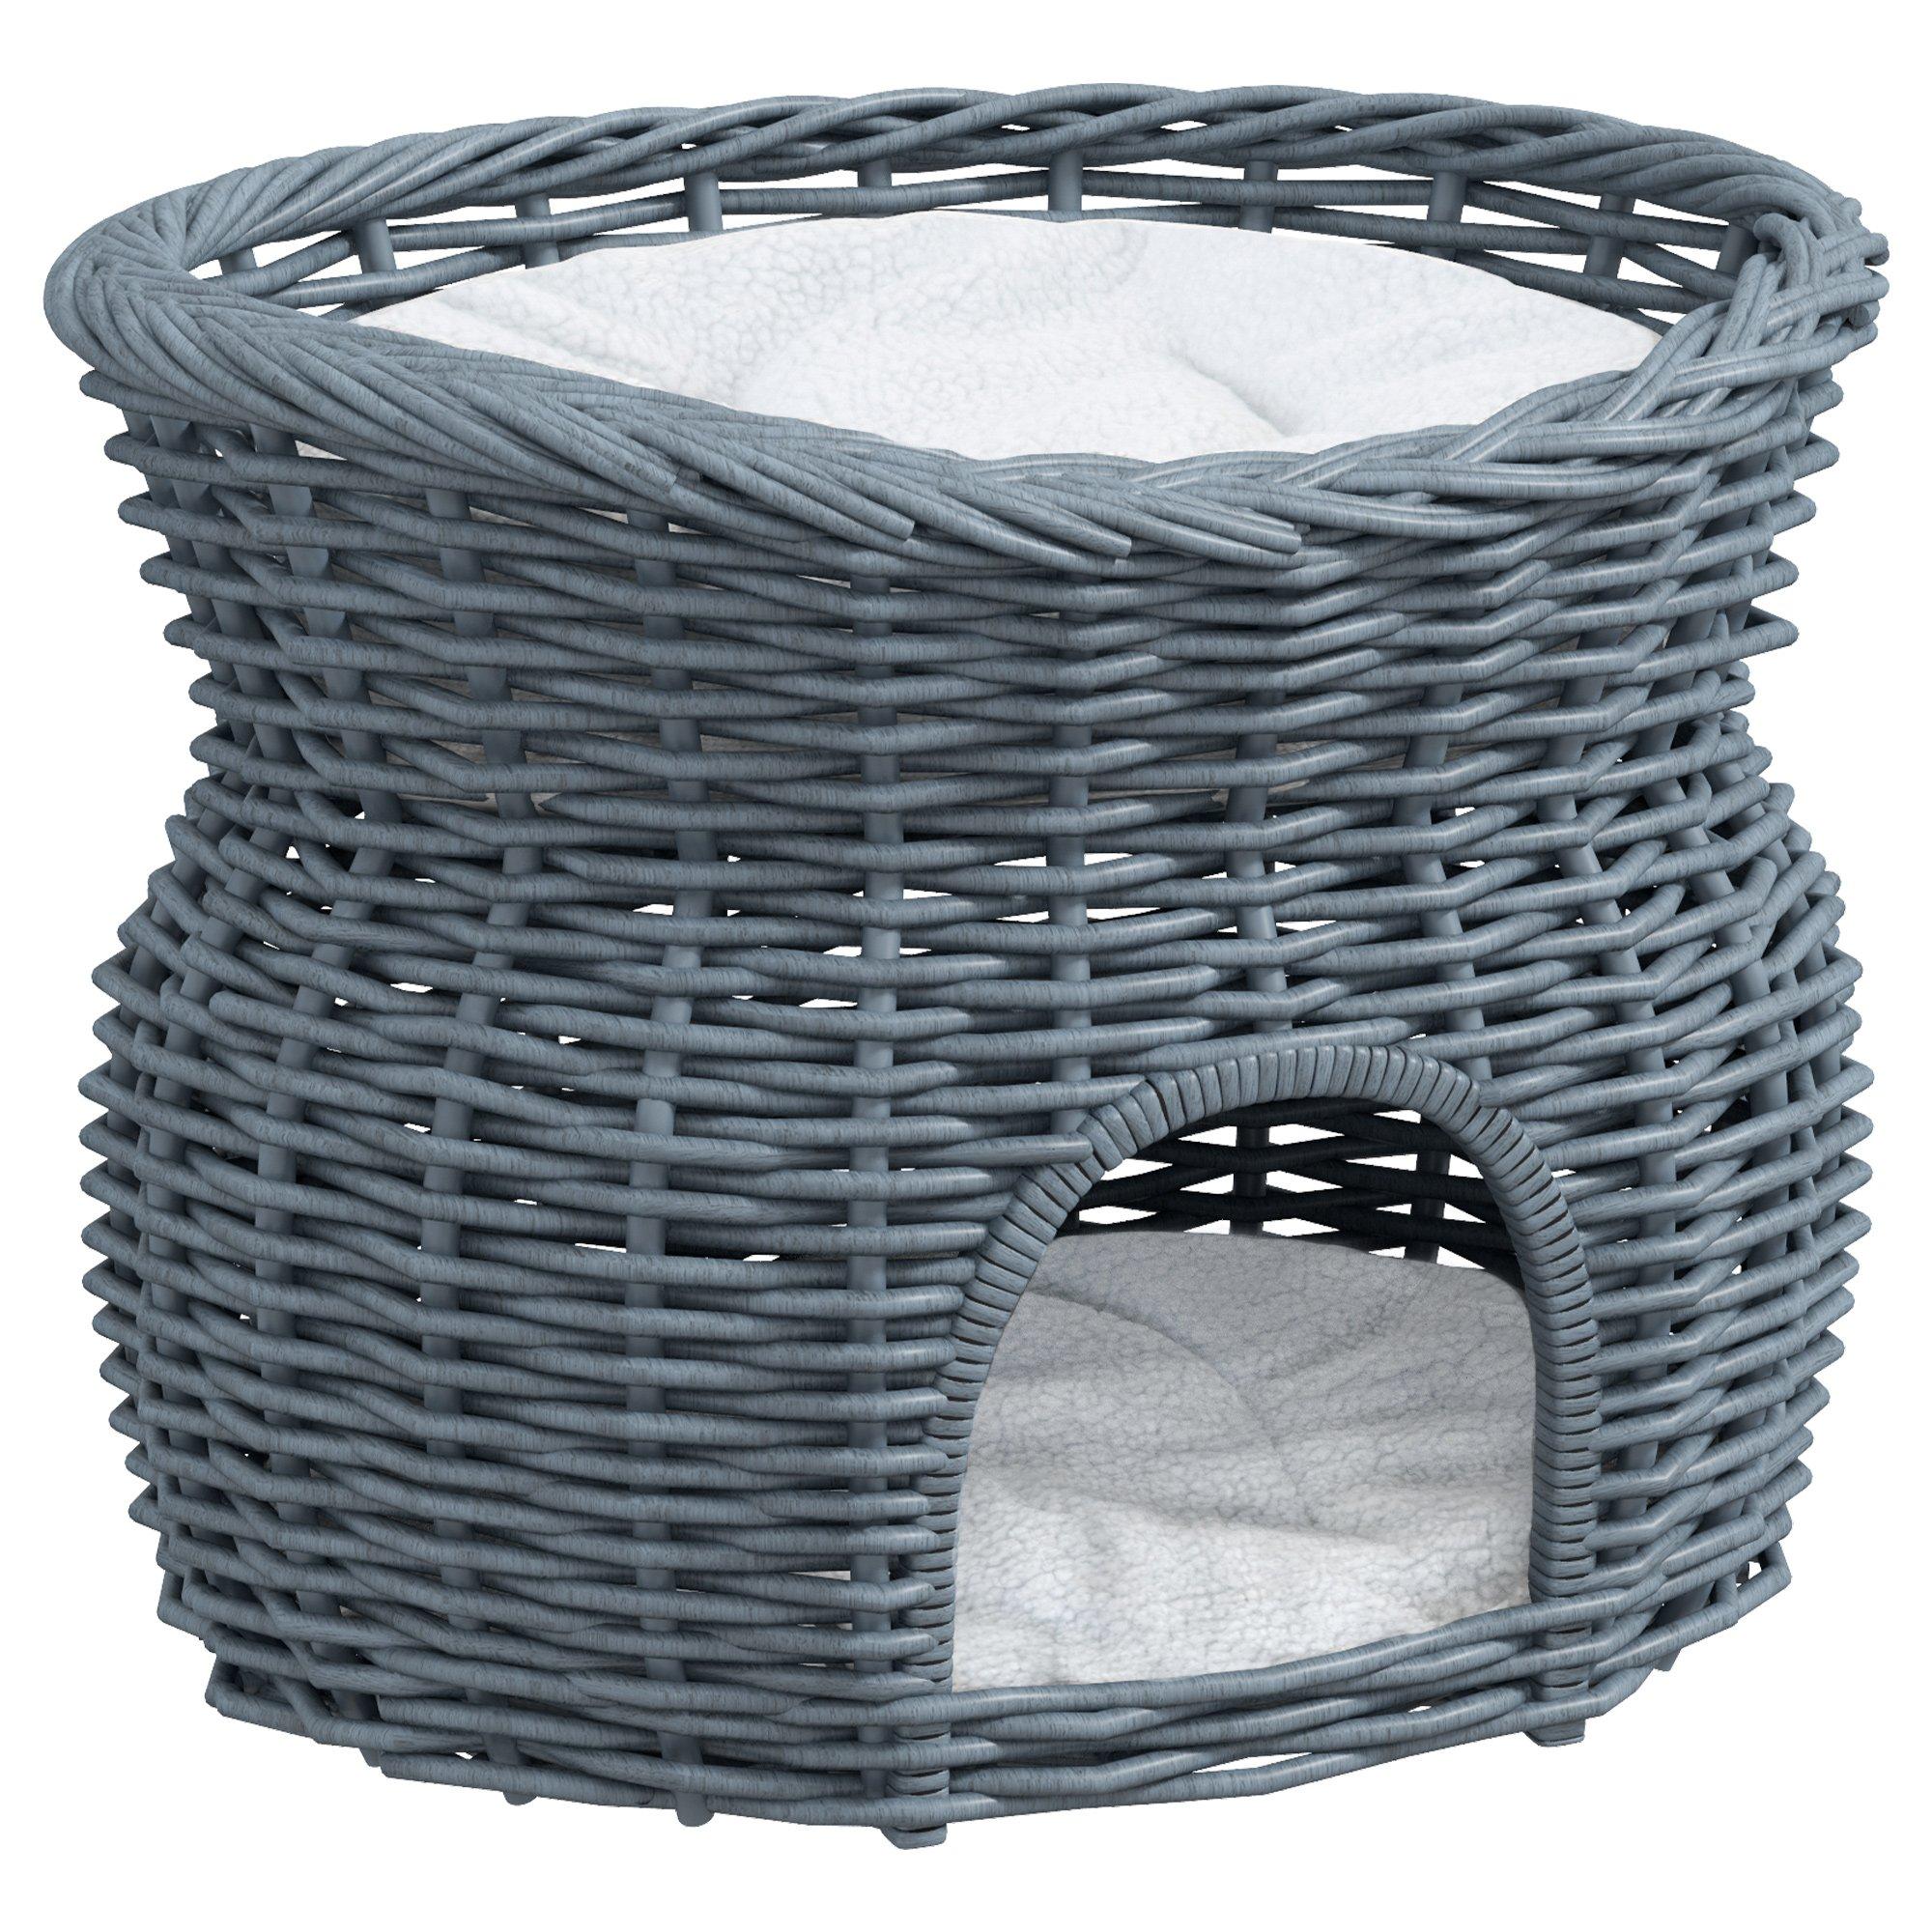 2-Tier Elevated Pet Cushion Bed Basket Willow Cat Tree House Condo Kennel Grey